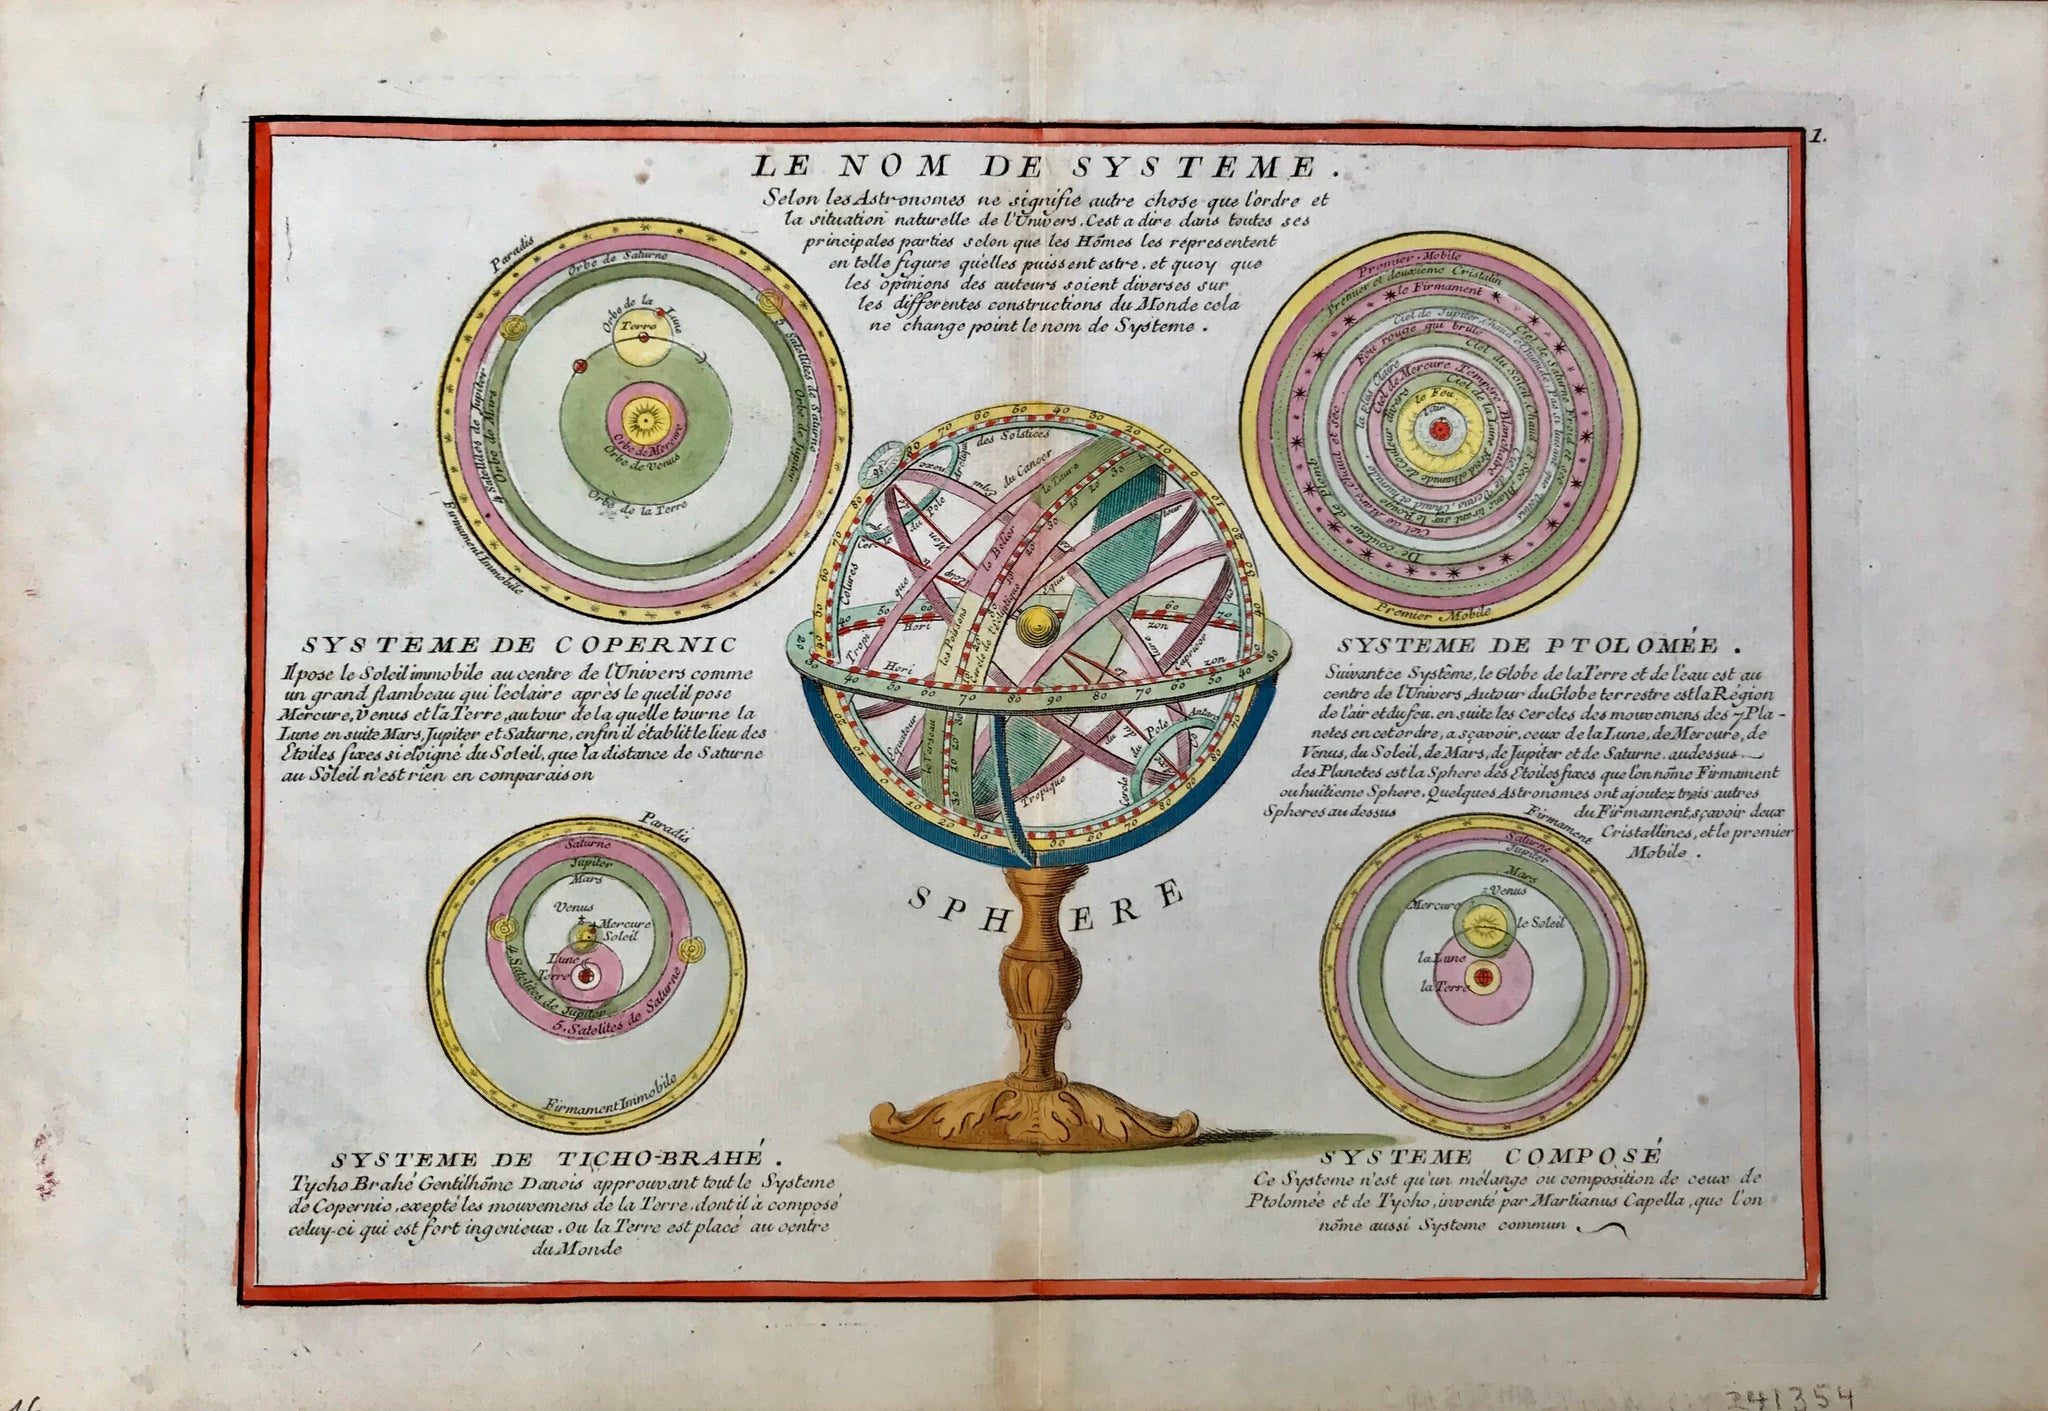 Copper etching ca 1750. Modern hand coloring.  This print shows the various historical name systems of the universe with illustrations, for instance, from Copernicus, Ptolomy and Ticho Brahé.